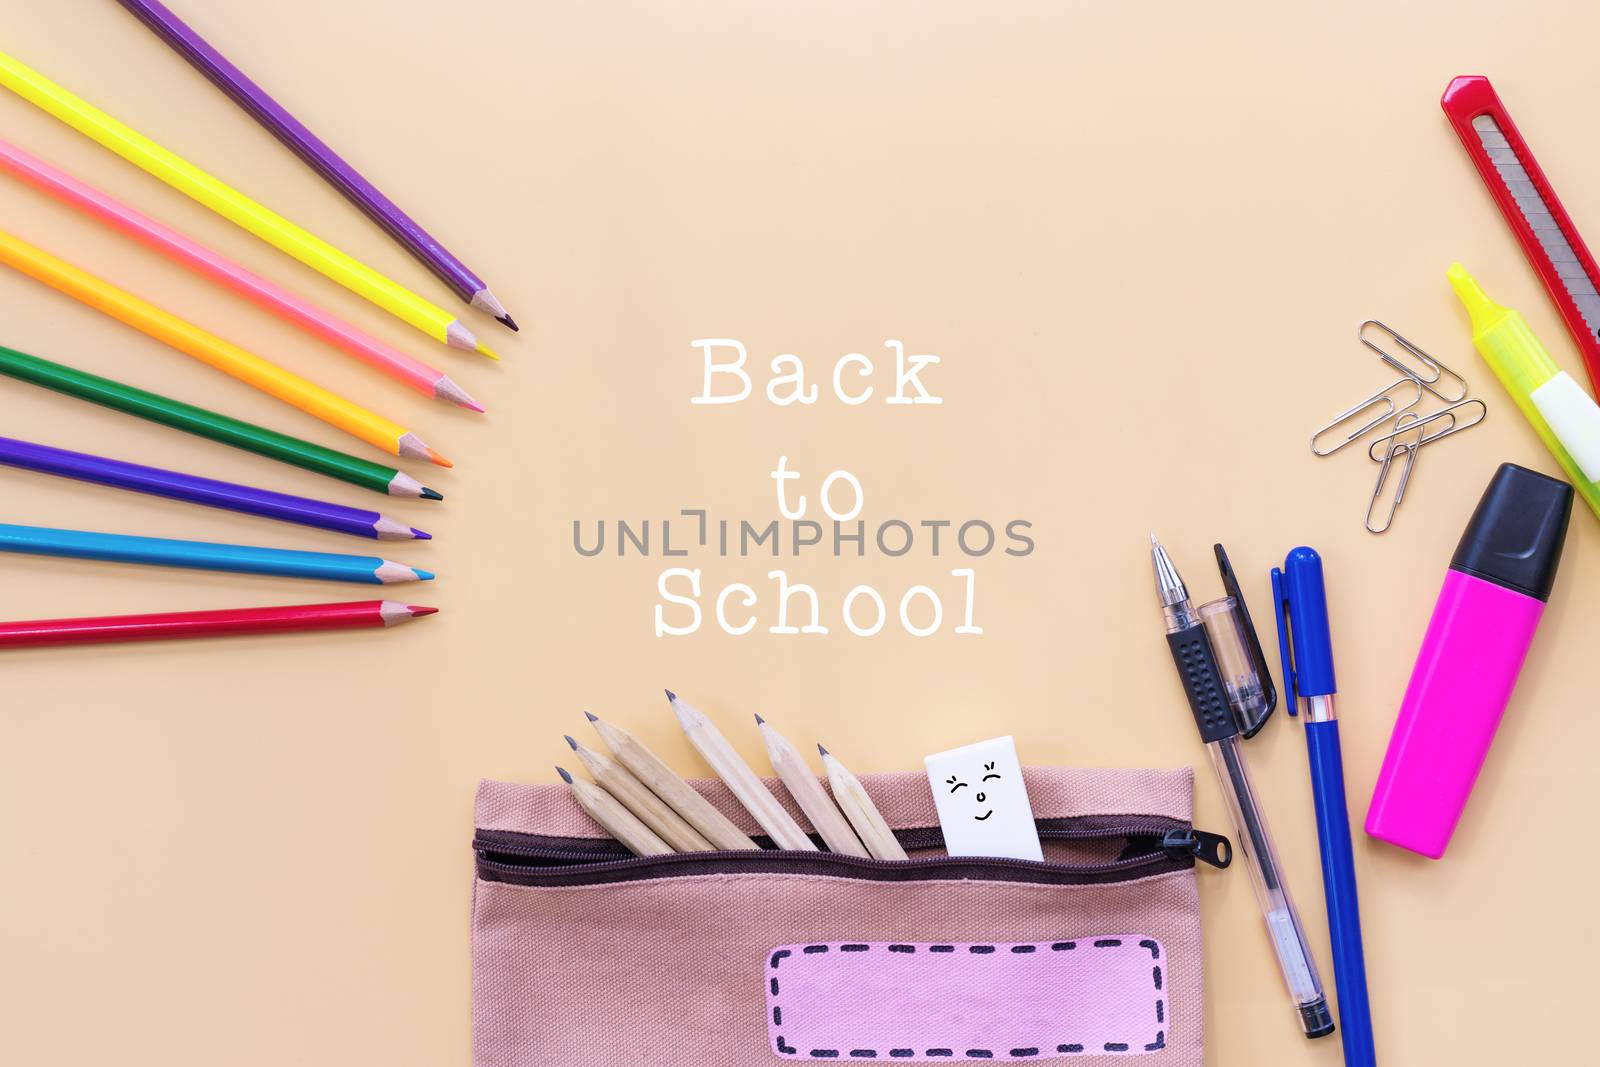 Welcome back to school background, colorful color pencil and sta by psodaz